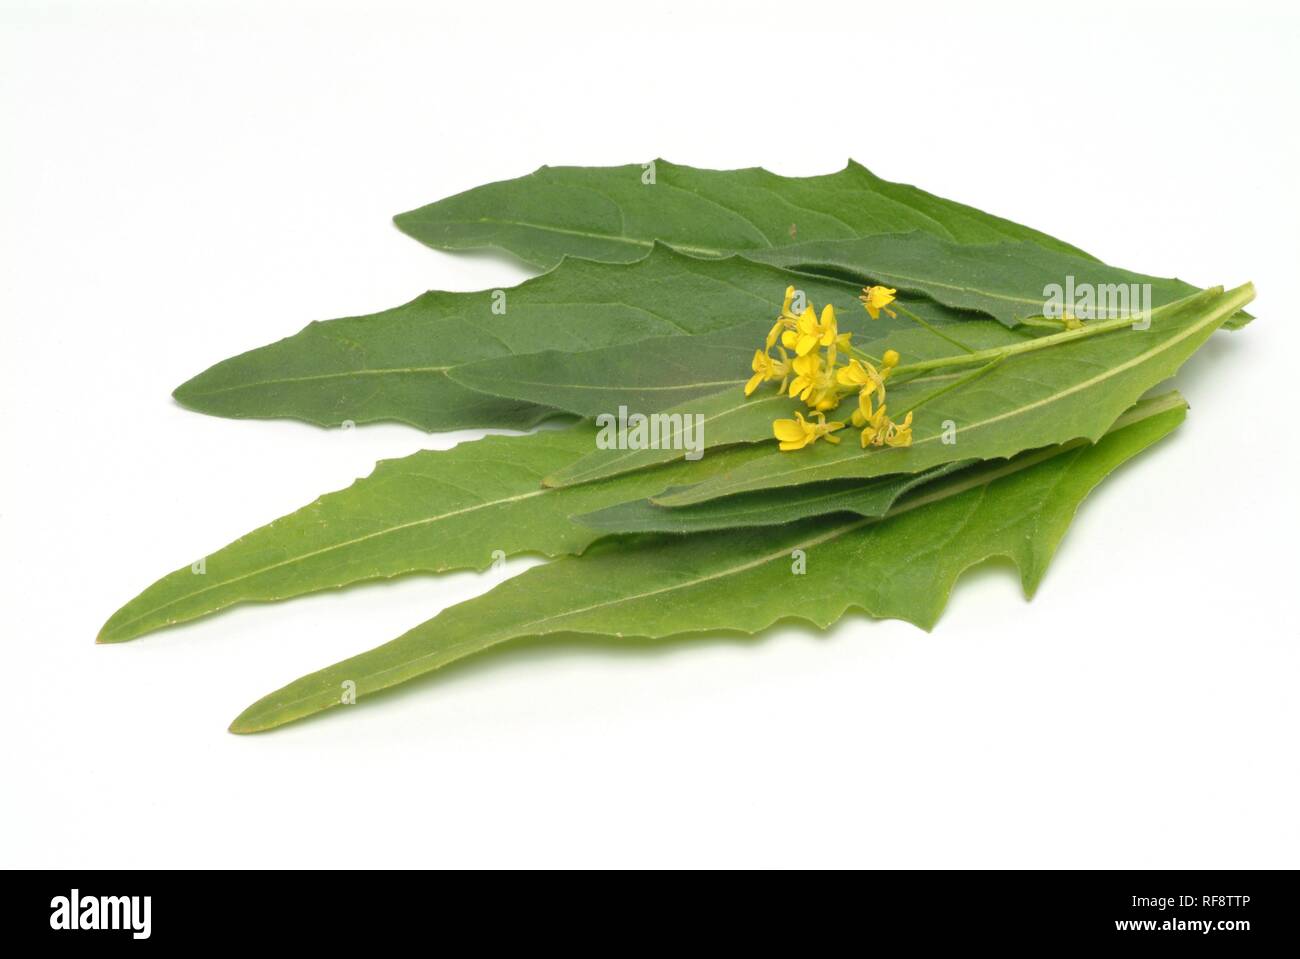 Turkish Rockets or Hill Mustard or Warty Cabbage (Bunias orientalis) Stock Photo